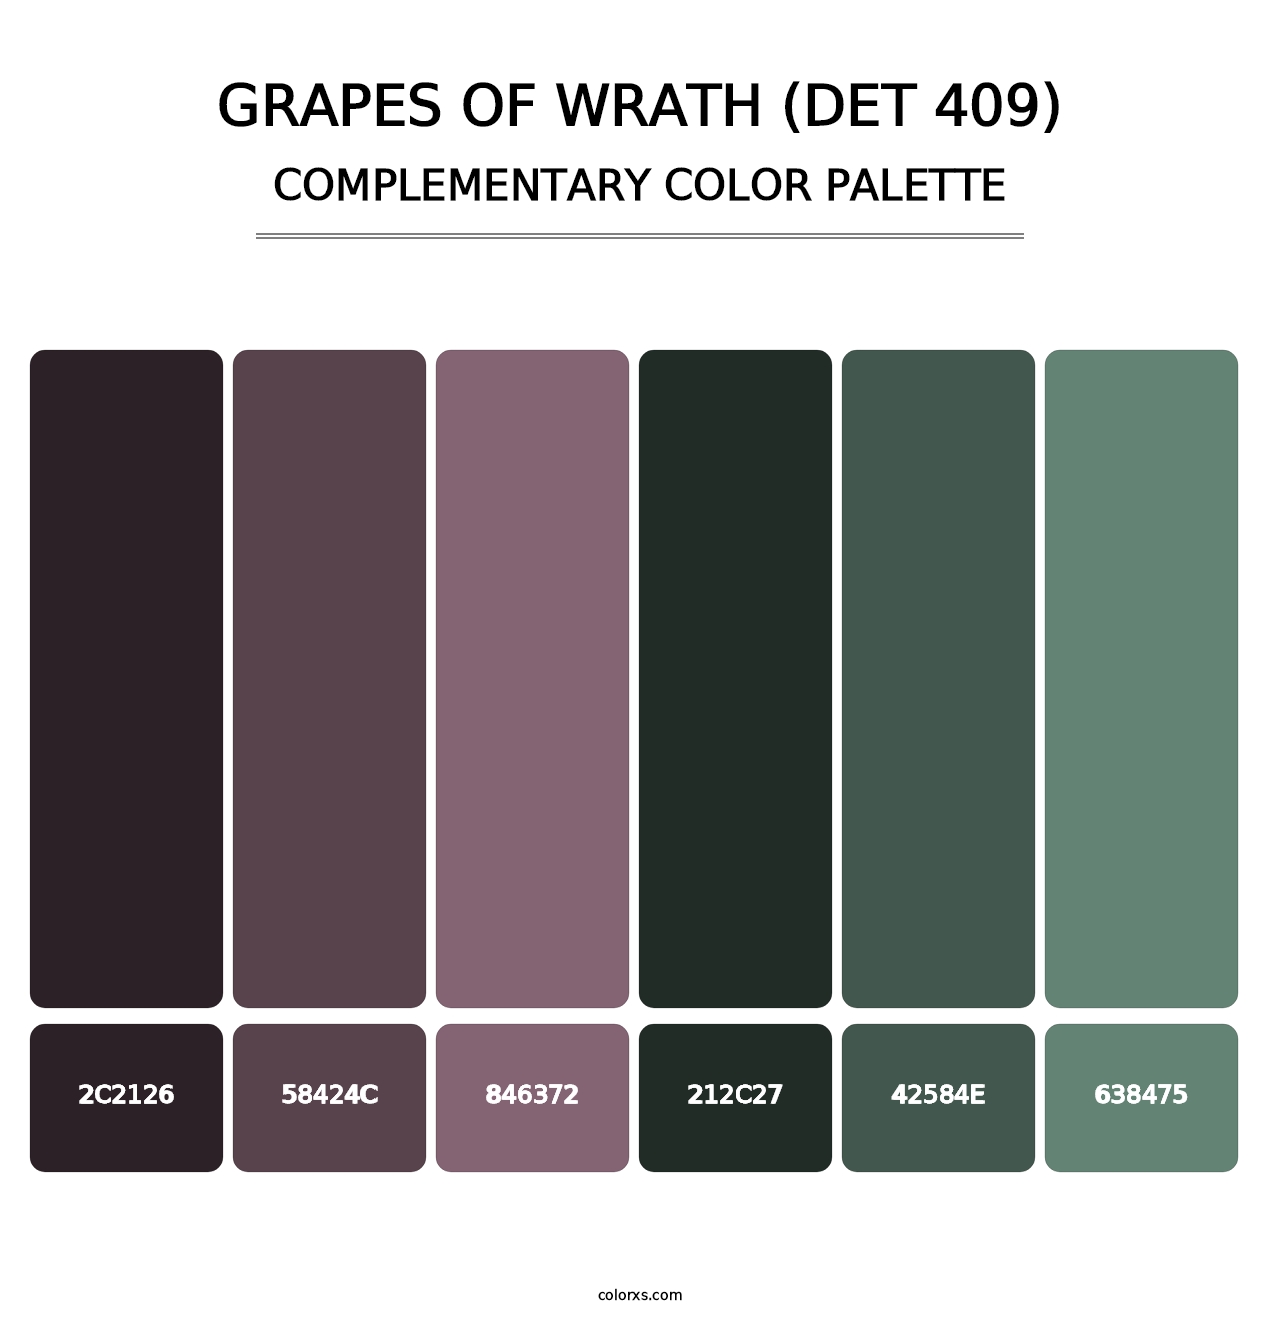 Grapes of Wrath (DET 409) - Complementary Color Palette